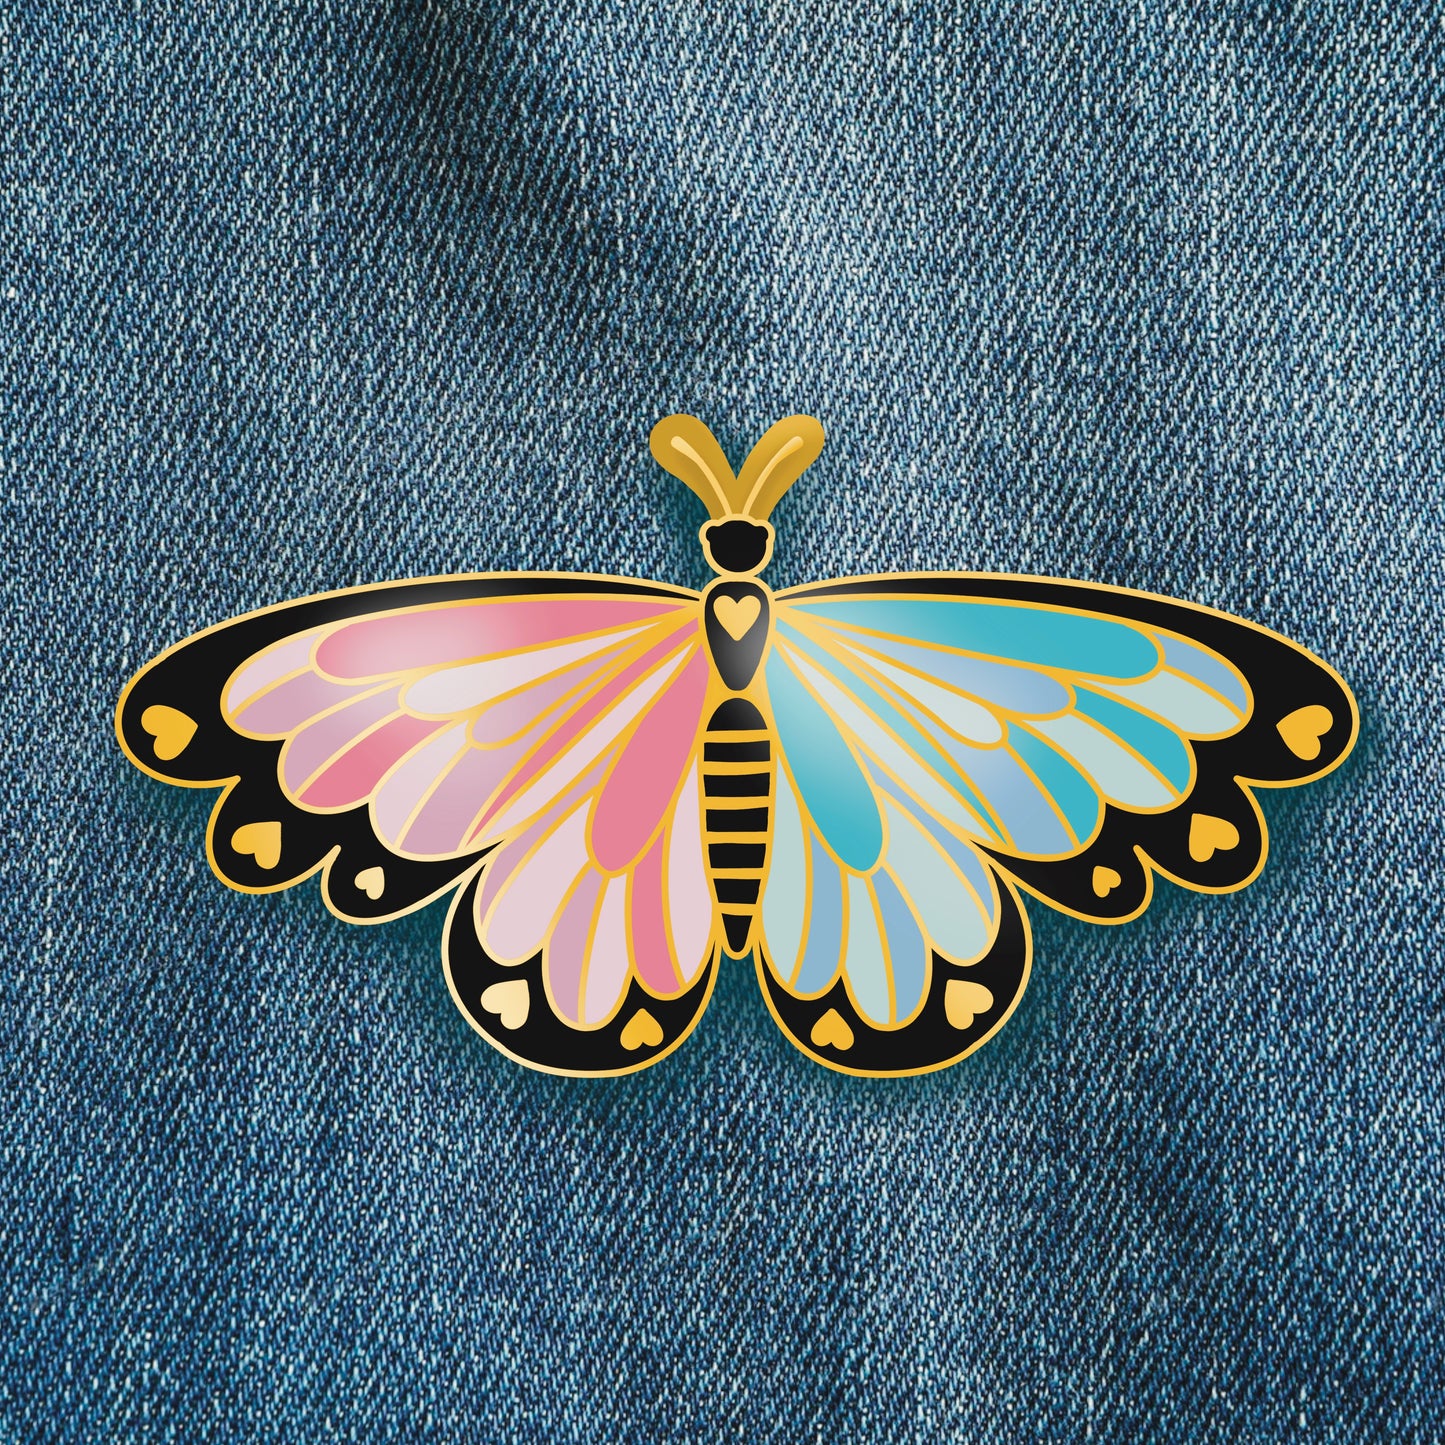 Pink, Blue, and Gold Baby Loss Butterfly Hard Enamel Pin